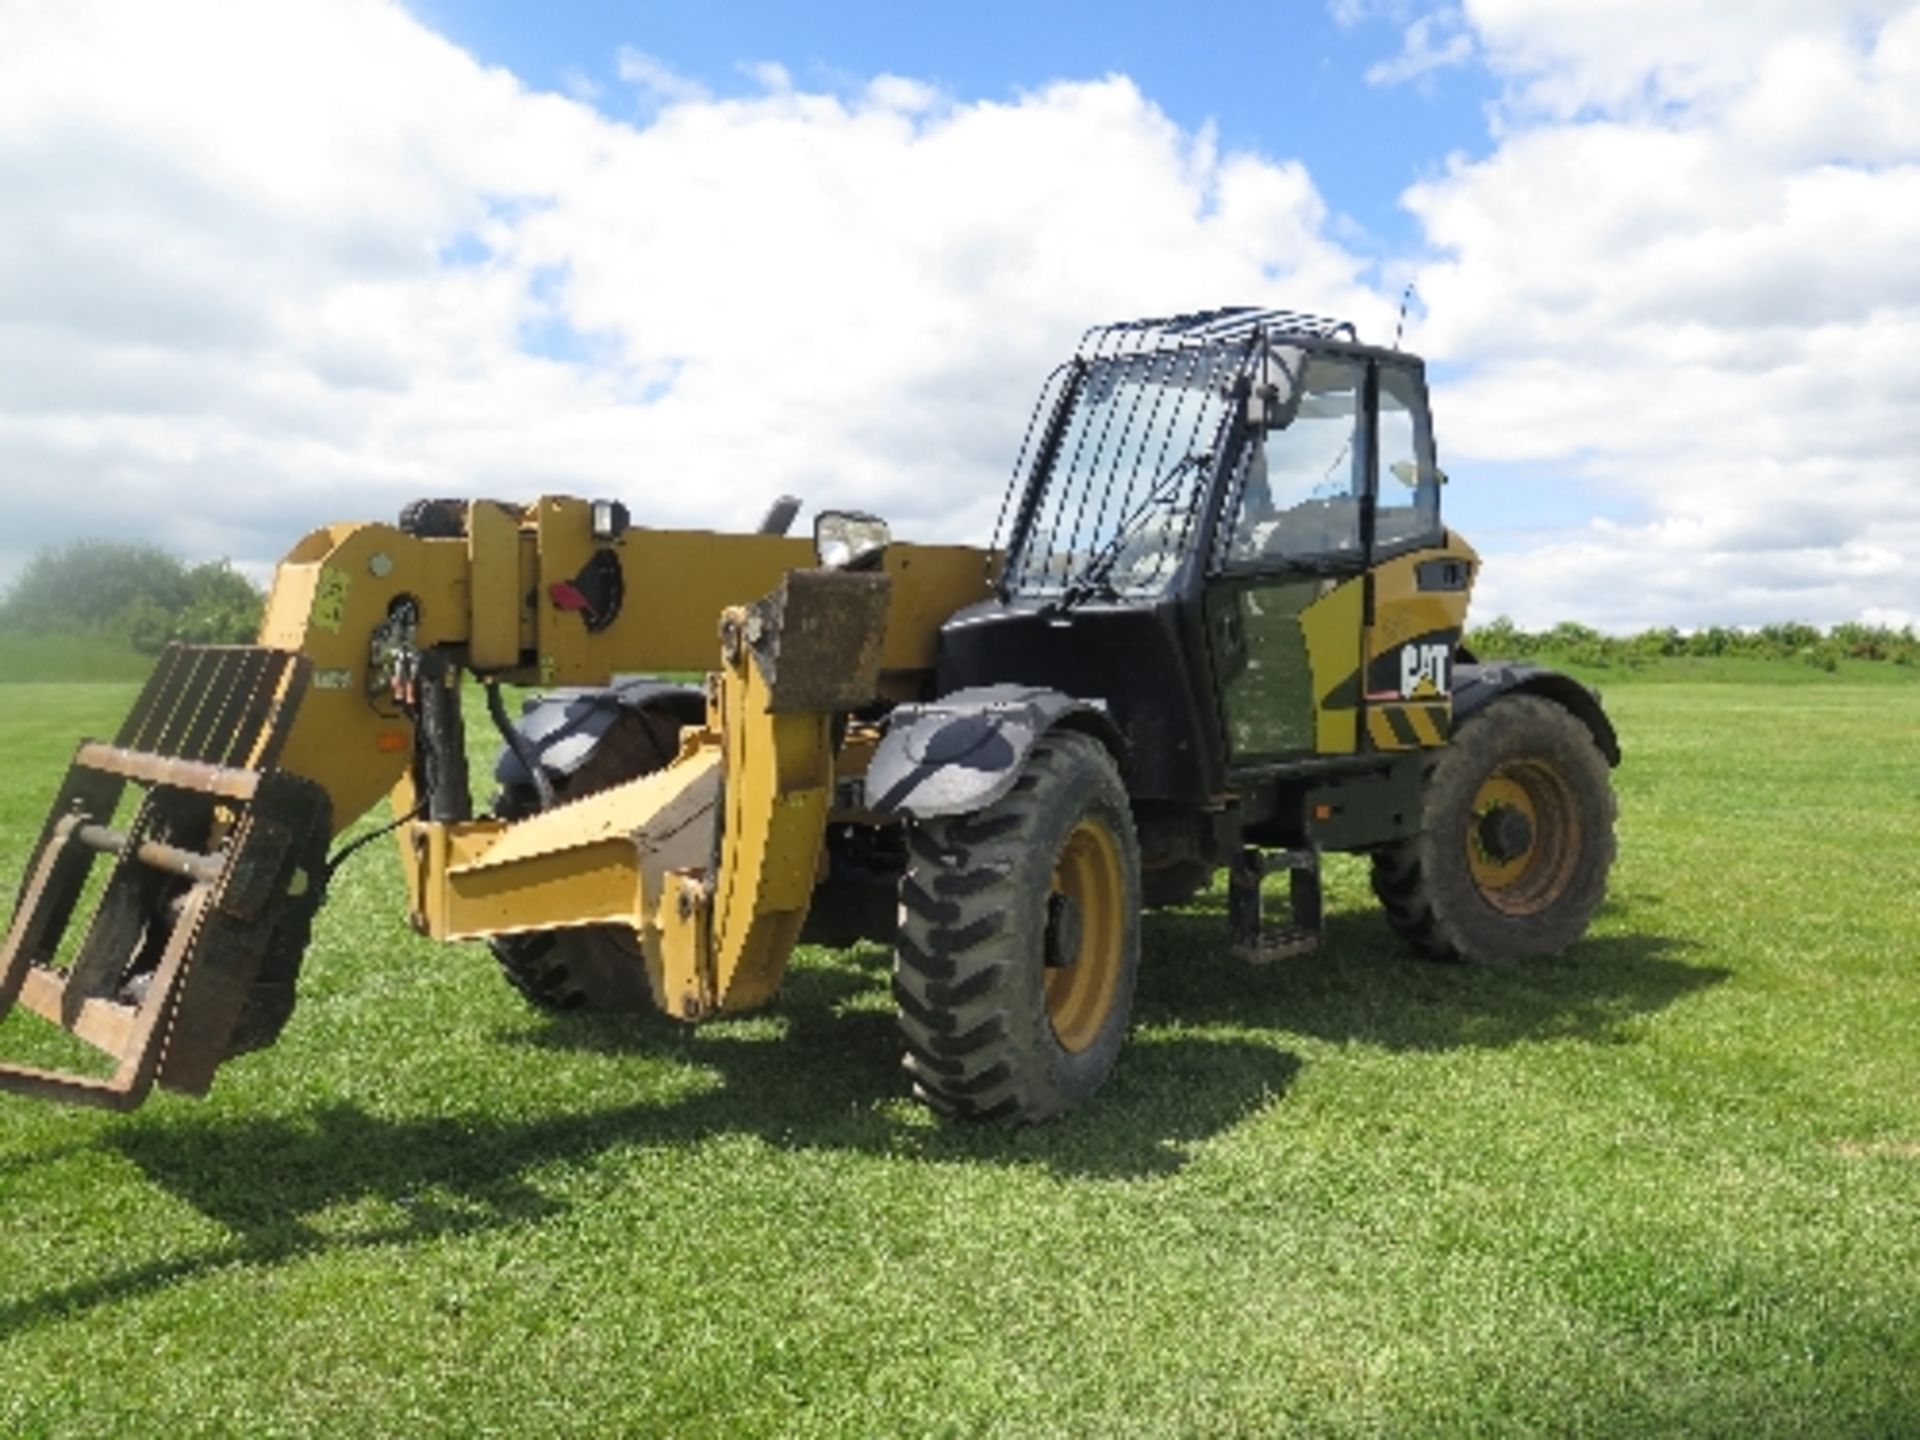 Caterpillar TH360B telehandler 2477 hrs 2007 154343ALL LOTS are SOLD AS SEEN WITHOUT WARRANTY